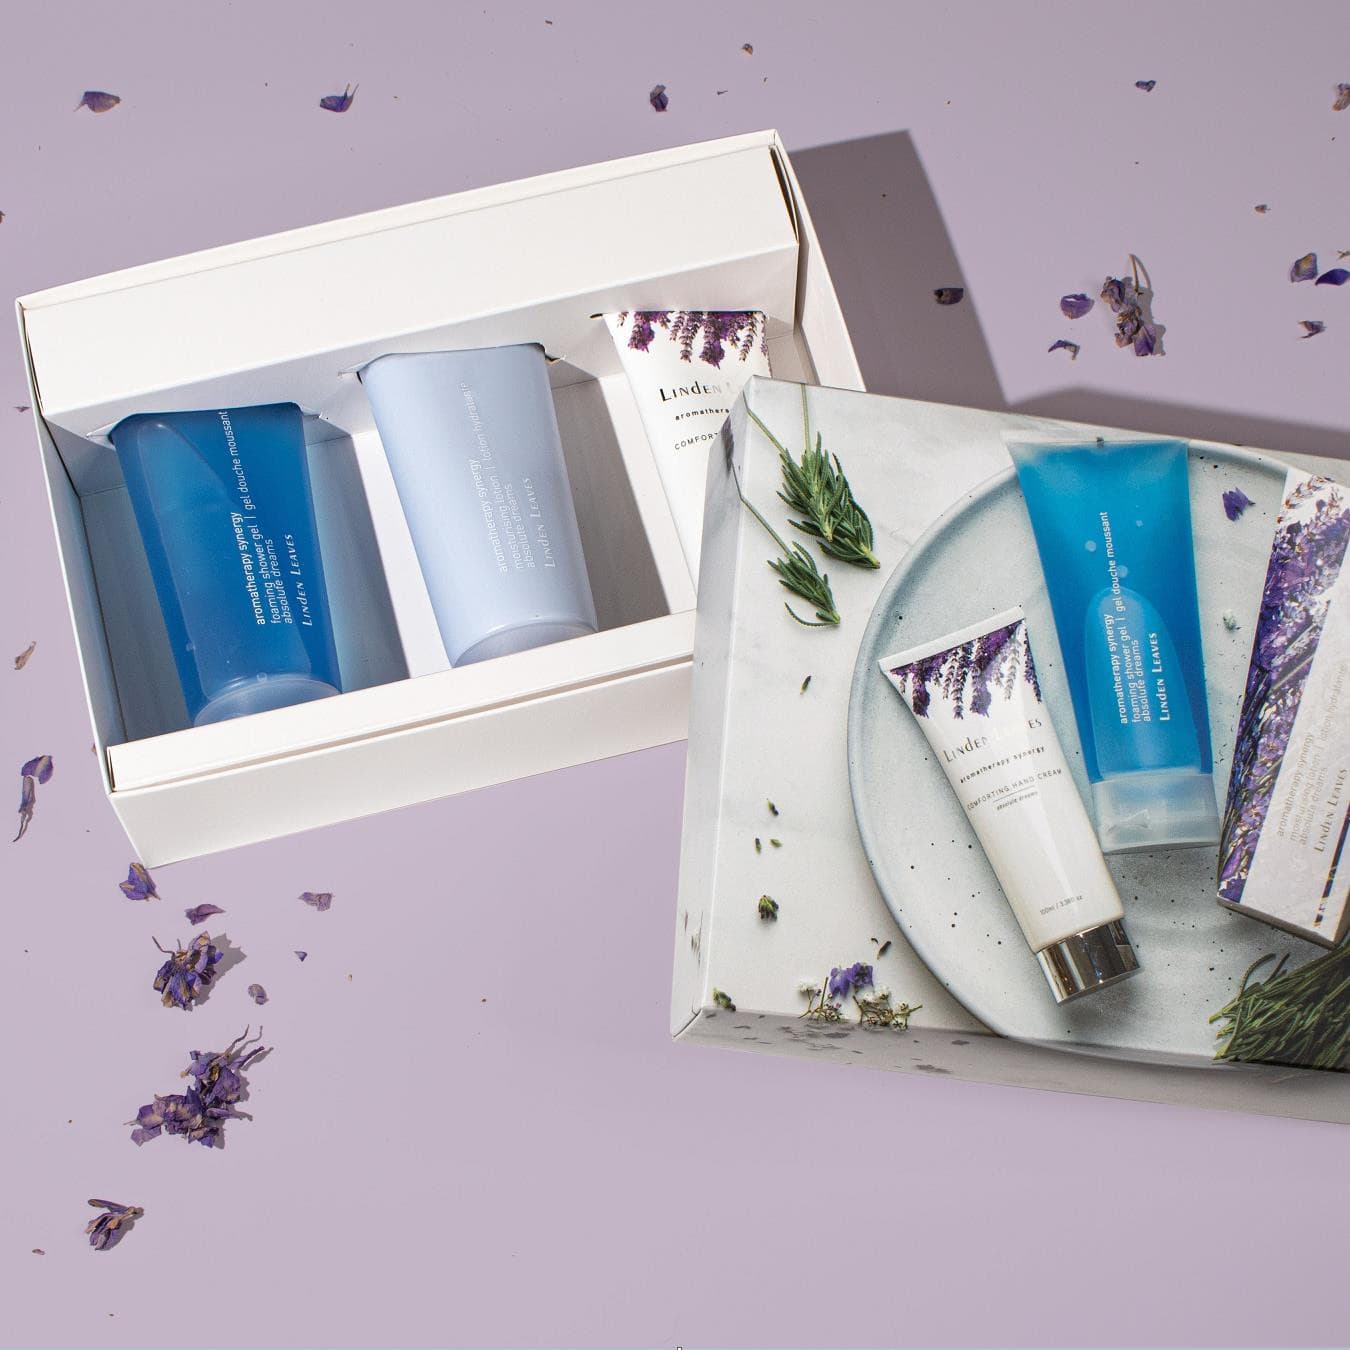 Linden Leaves 琳登丽诗 Aromatherapy Synergy 芳疗系列  gift set - shower gel, lotion, hand cream - memories - 薰衣草